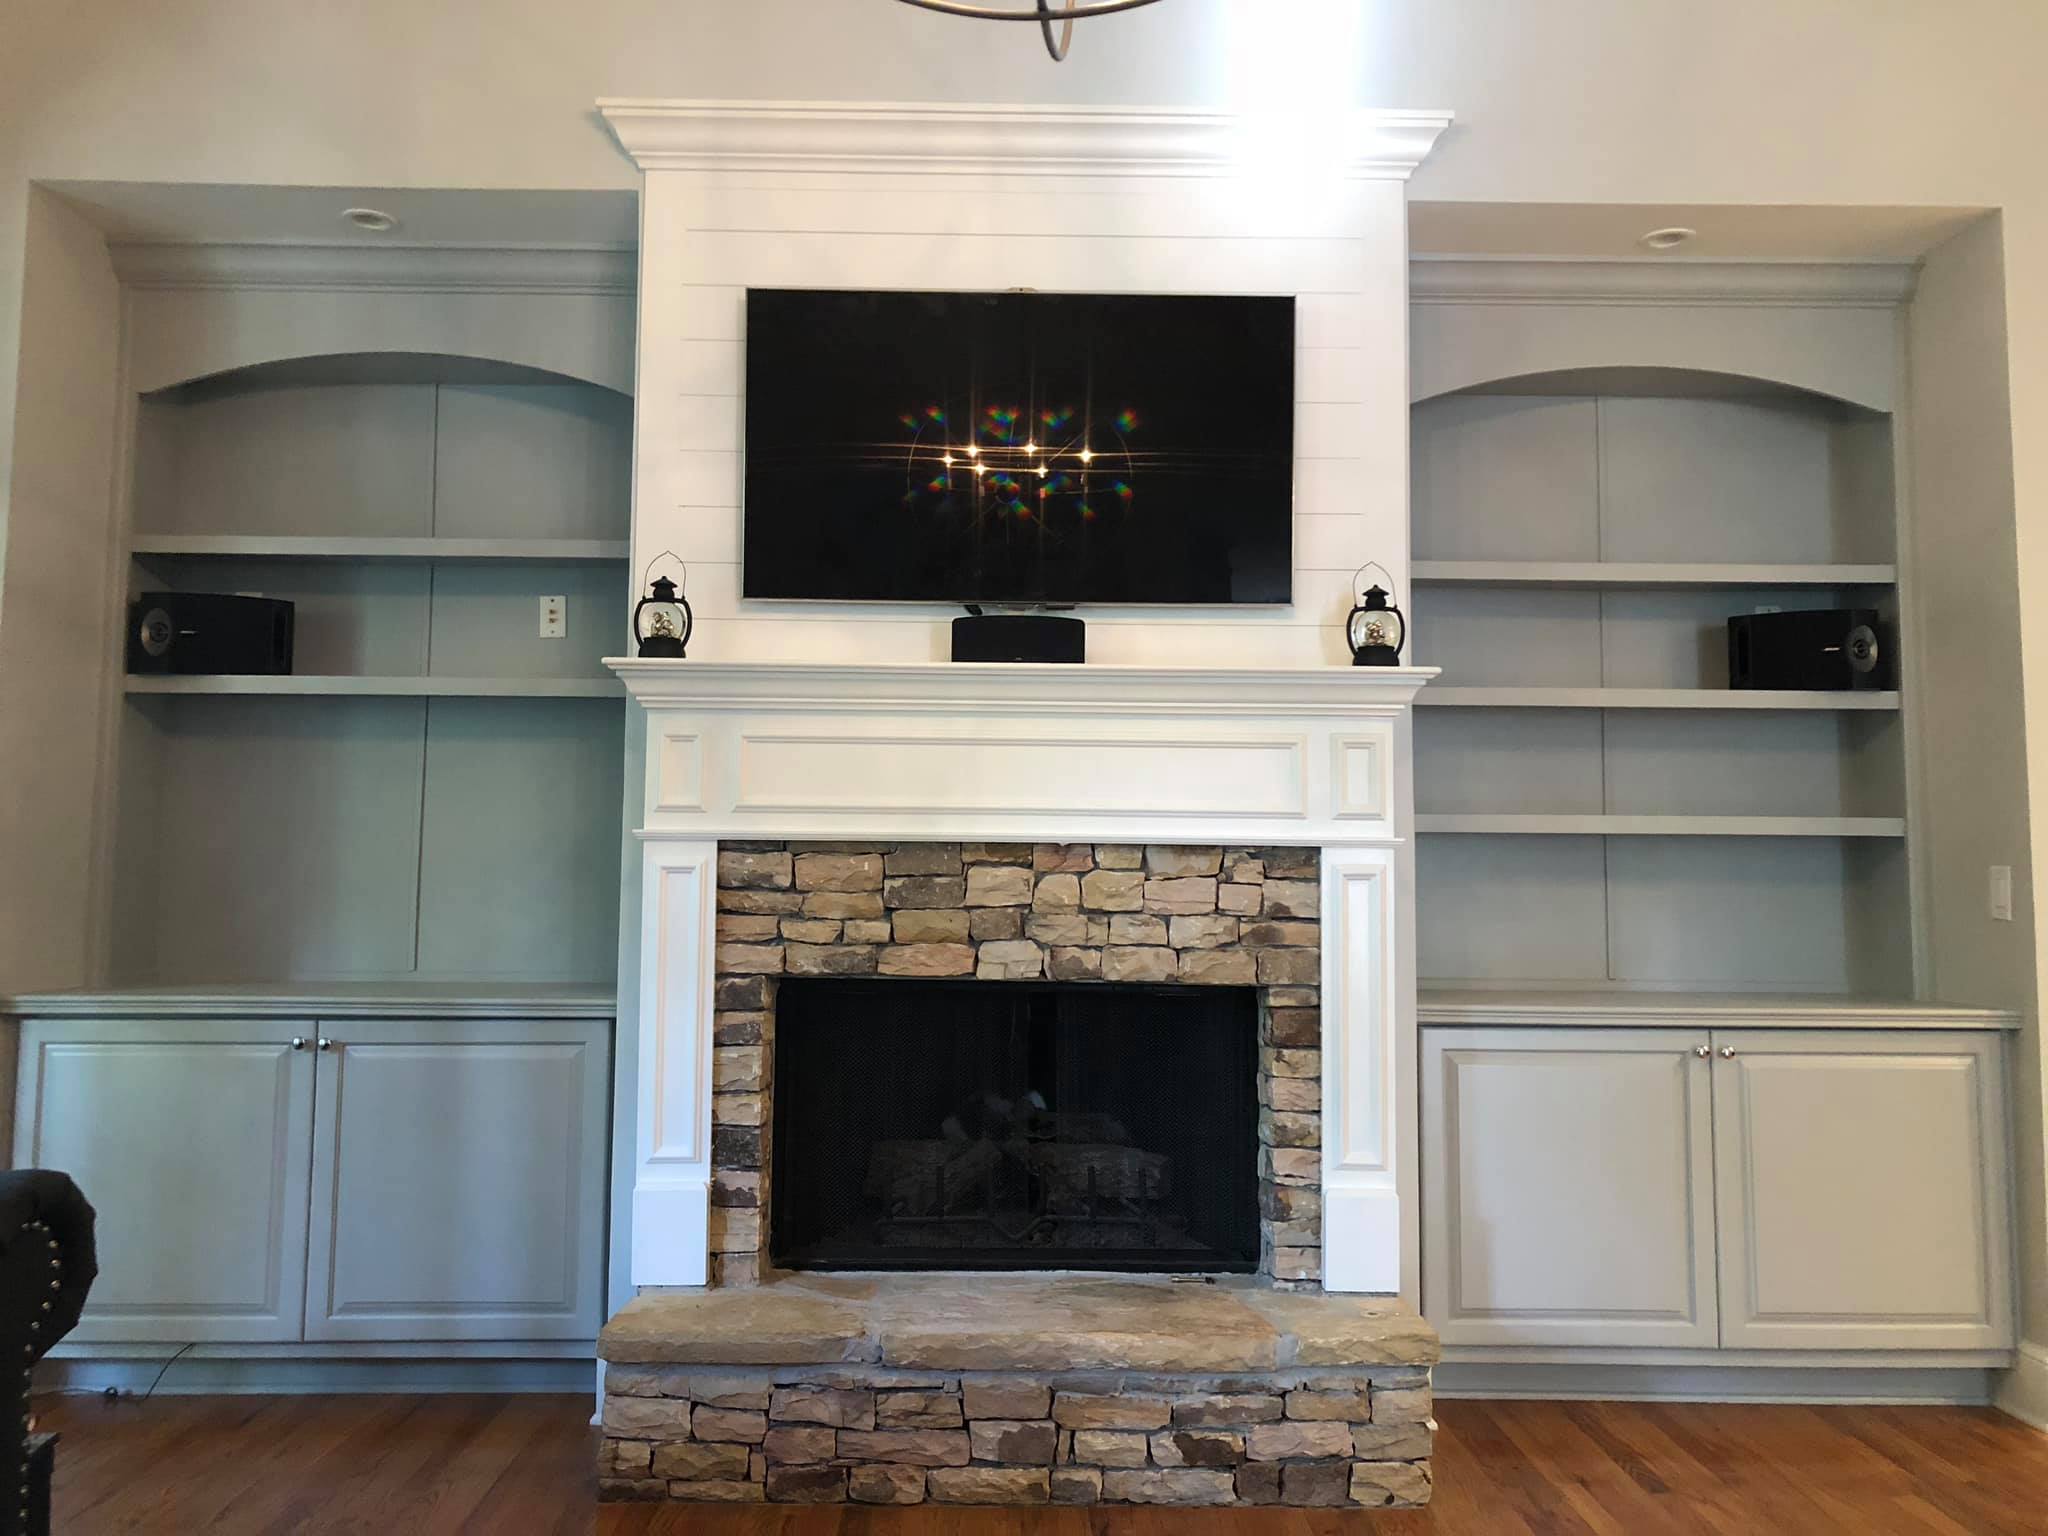 Fireplace with Mantel and Wall High Built in Cabinets with Double Doors Painted Grey 4